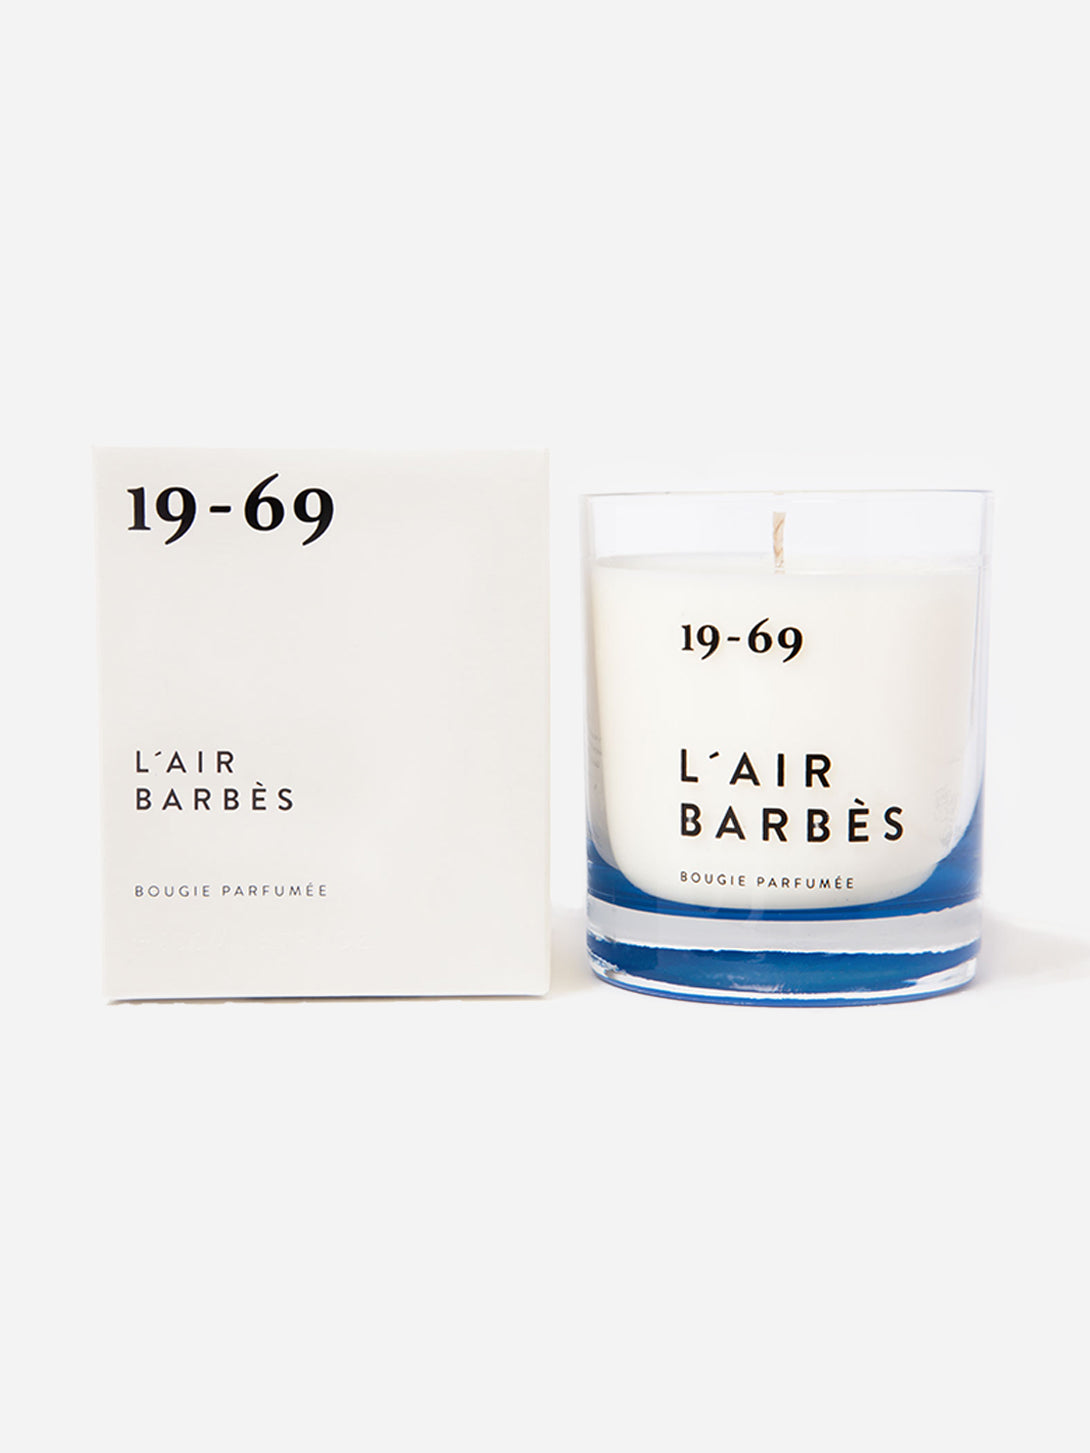 L'AIR BARBES candle for men and women unisex female christ 200ml 19-69